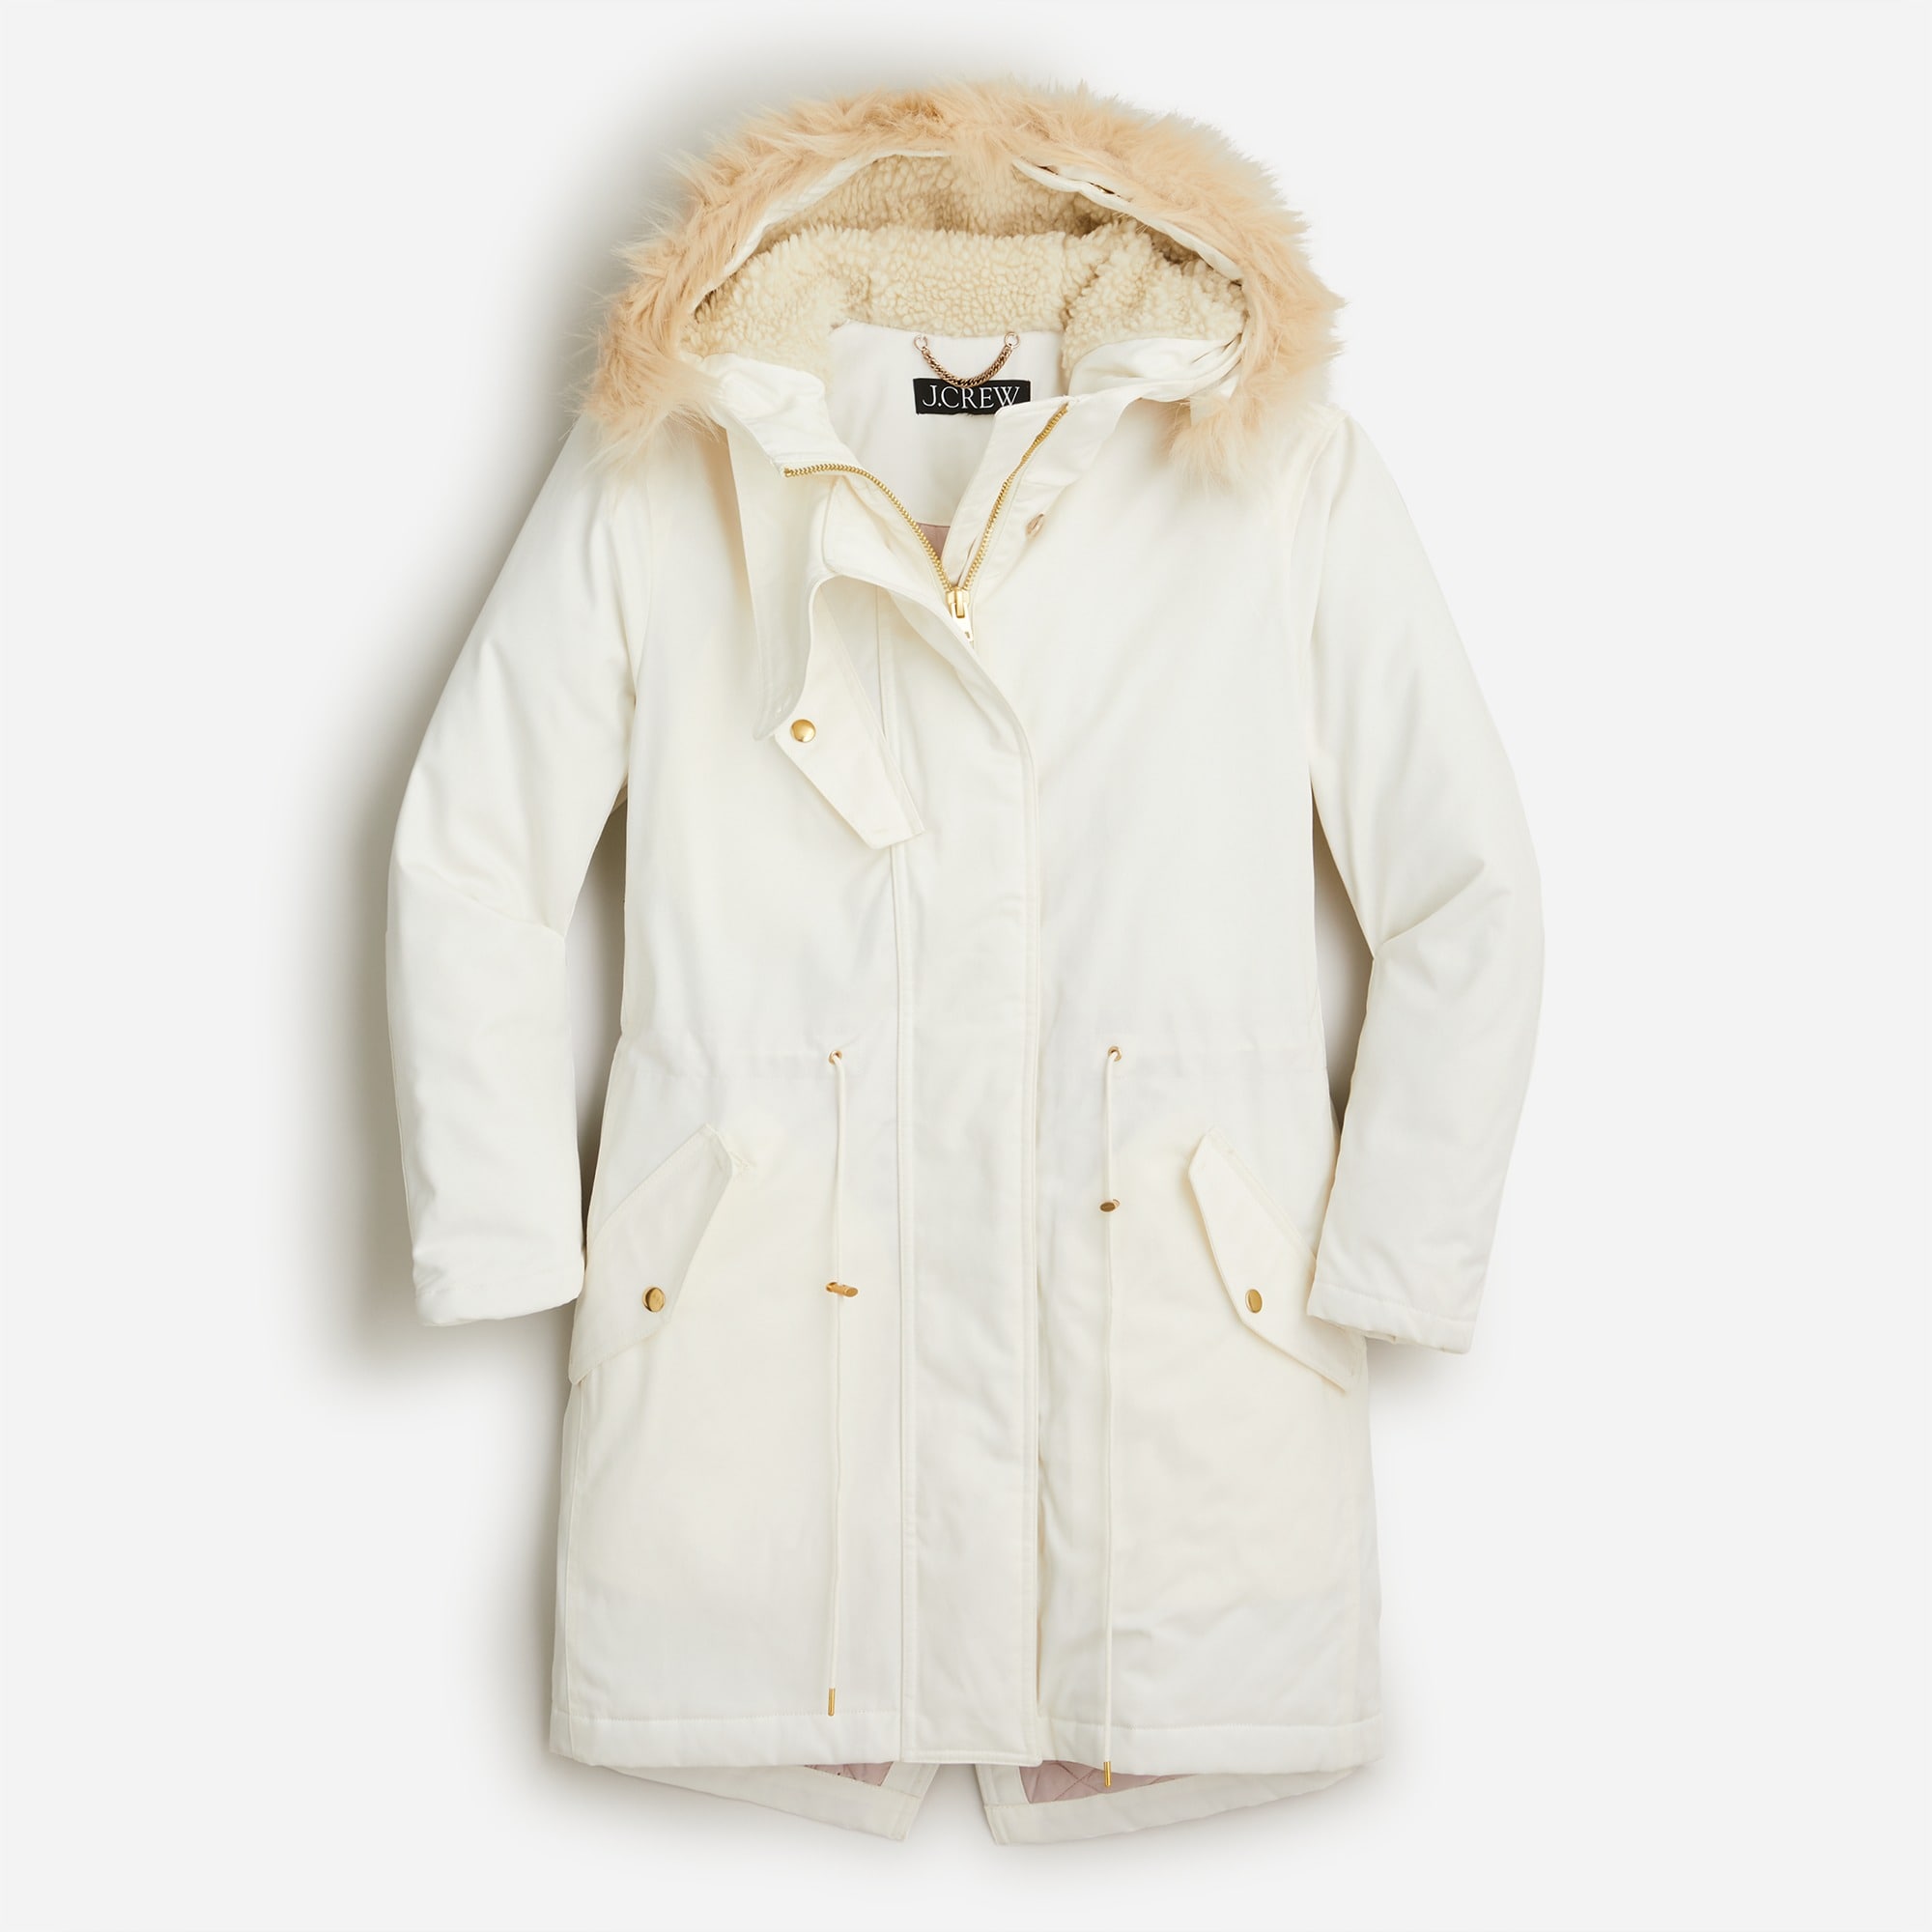 J.Crew Wintress Coat at Cathedral Park - Crystalin Marie  Winter coats  women, Winter jackets women, Winter coat outfits